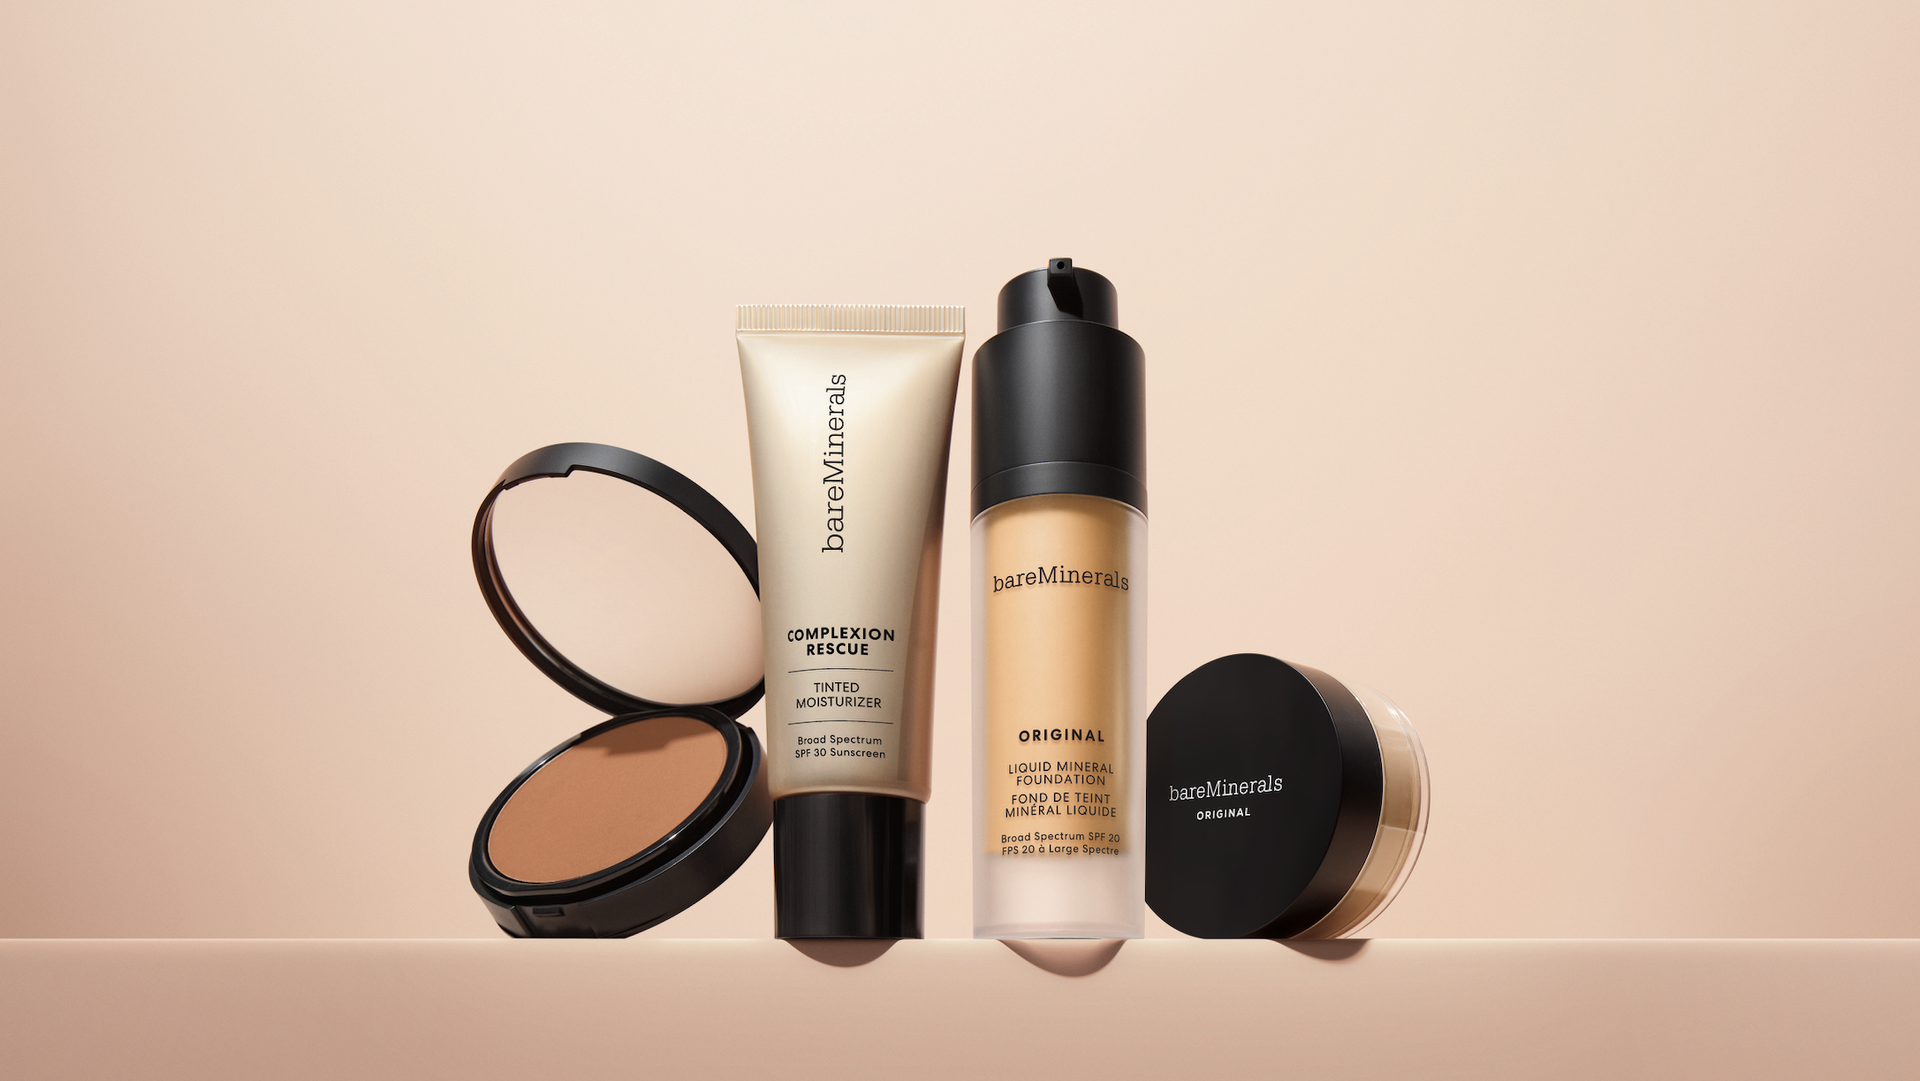 Educators and school staff save 20% on bareMinerals beauty products.